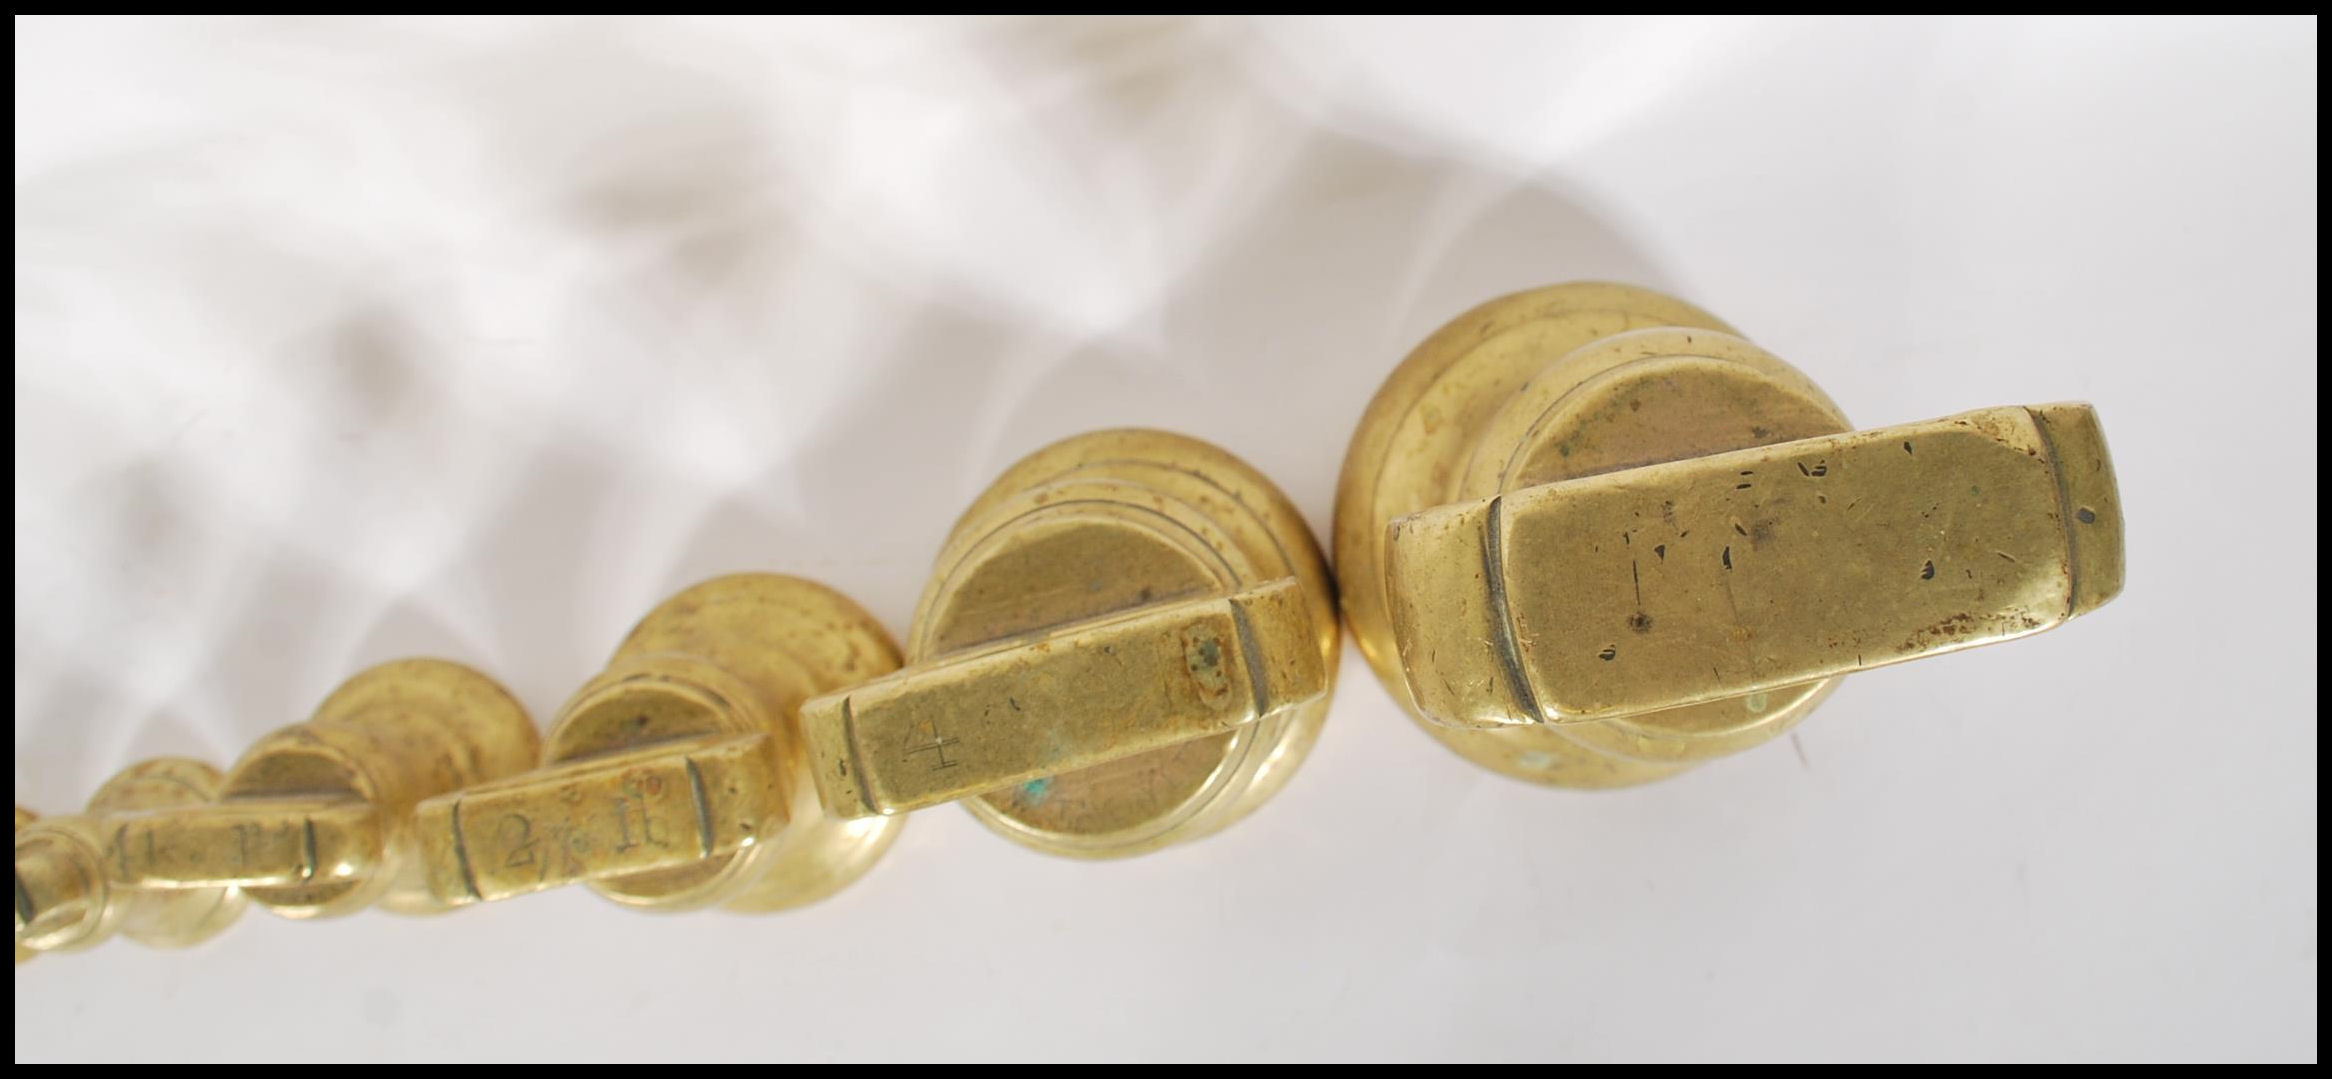 A selection of 20th century graduating brass bell weights having carrying handles atop, with the - Image 5 of 7